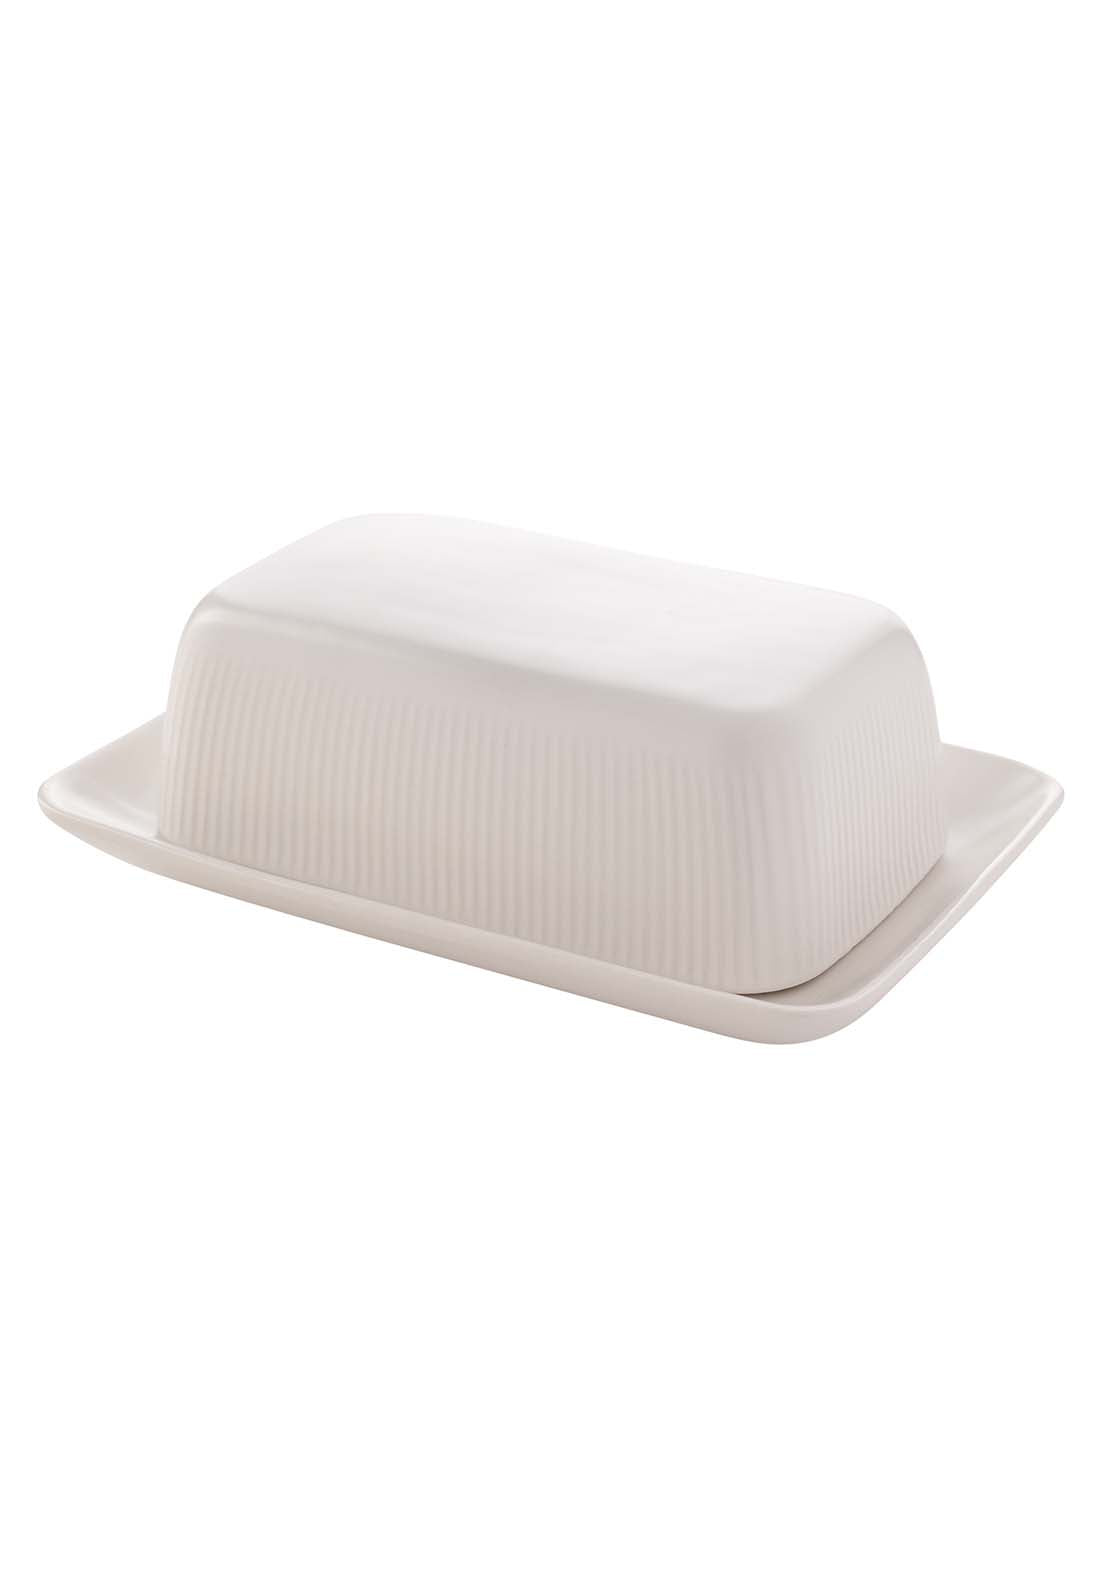 The Home Collection Ribbed Butter Dish - White 1 Shaws Department Stores